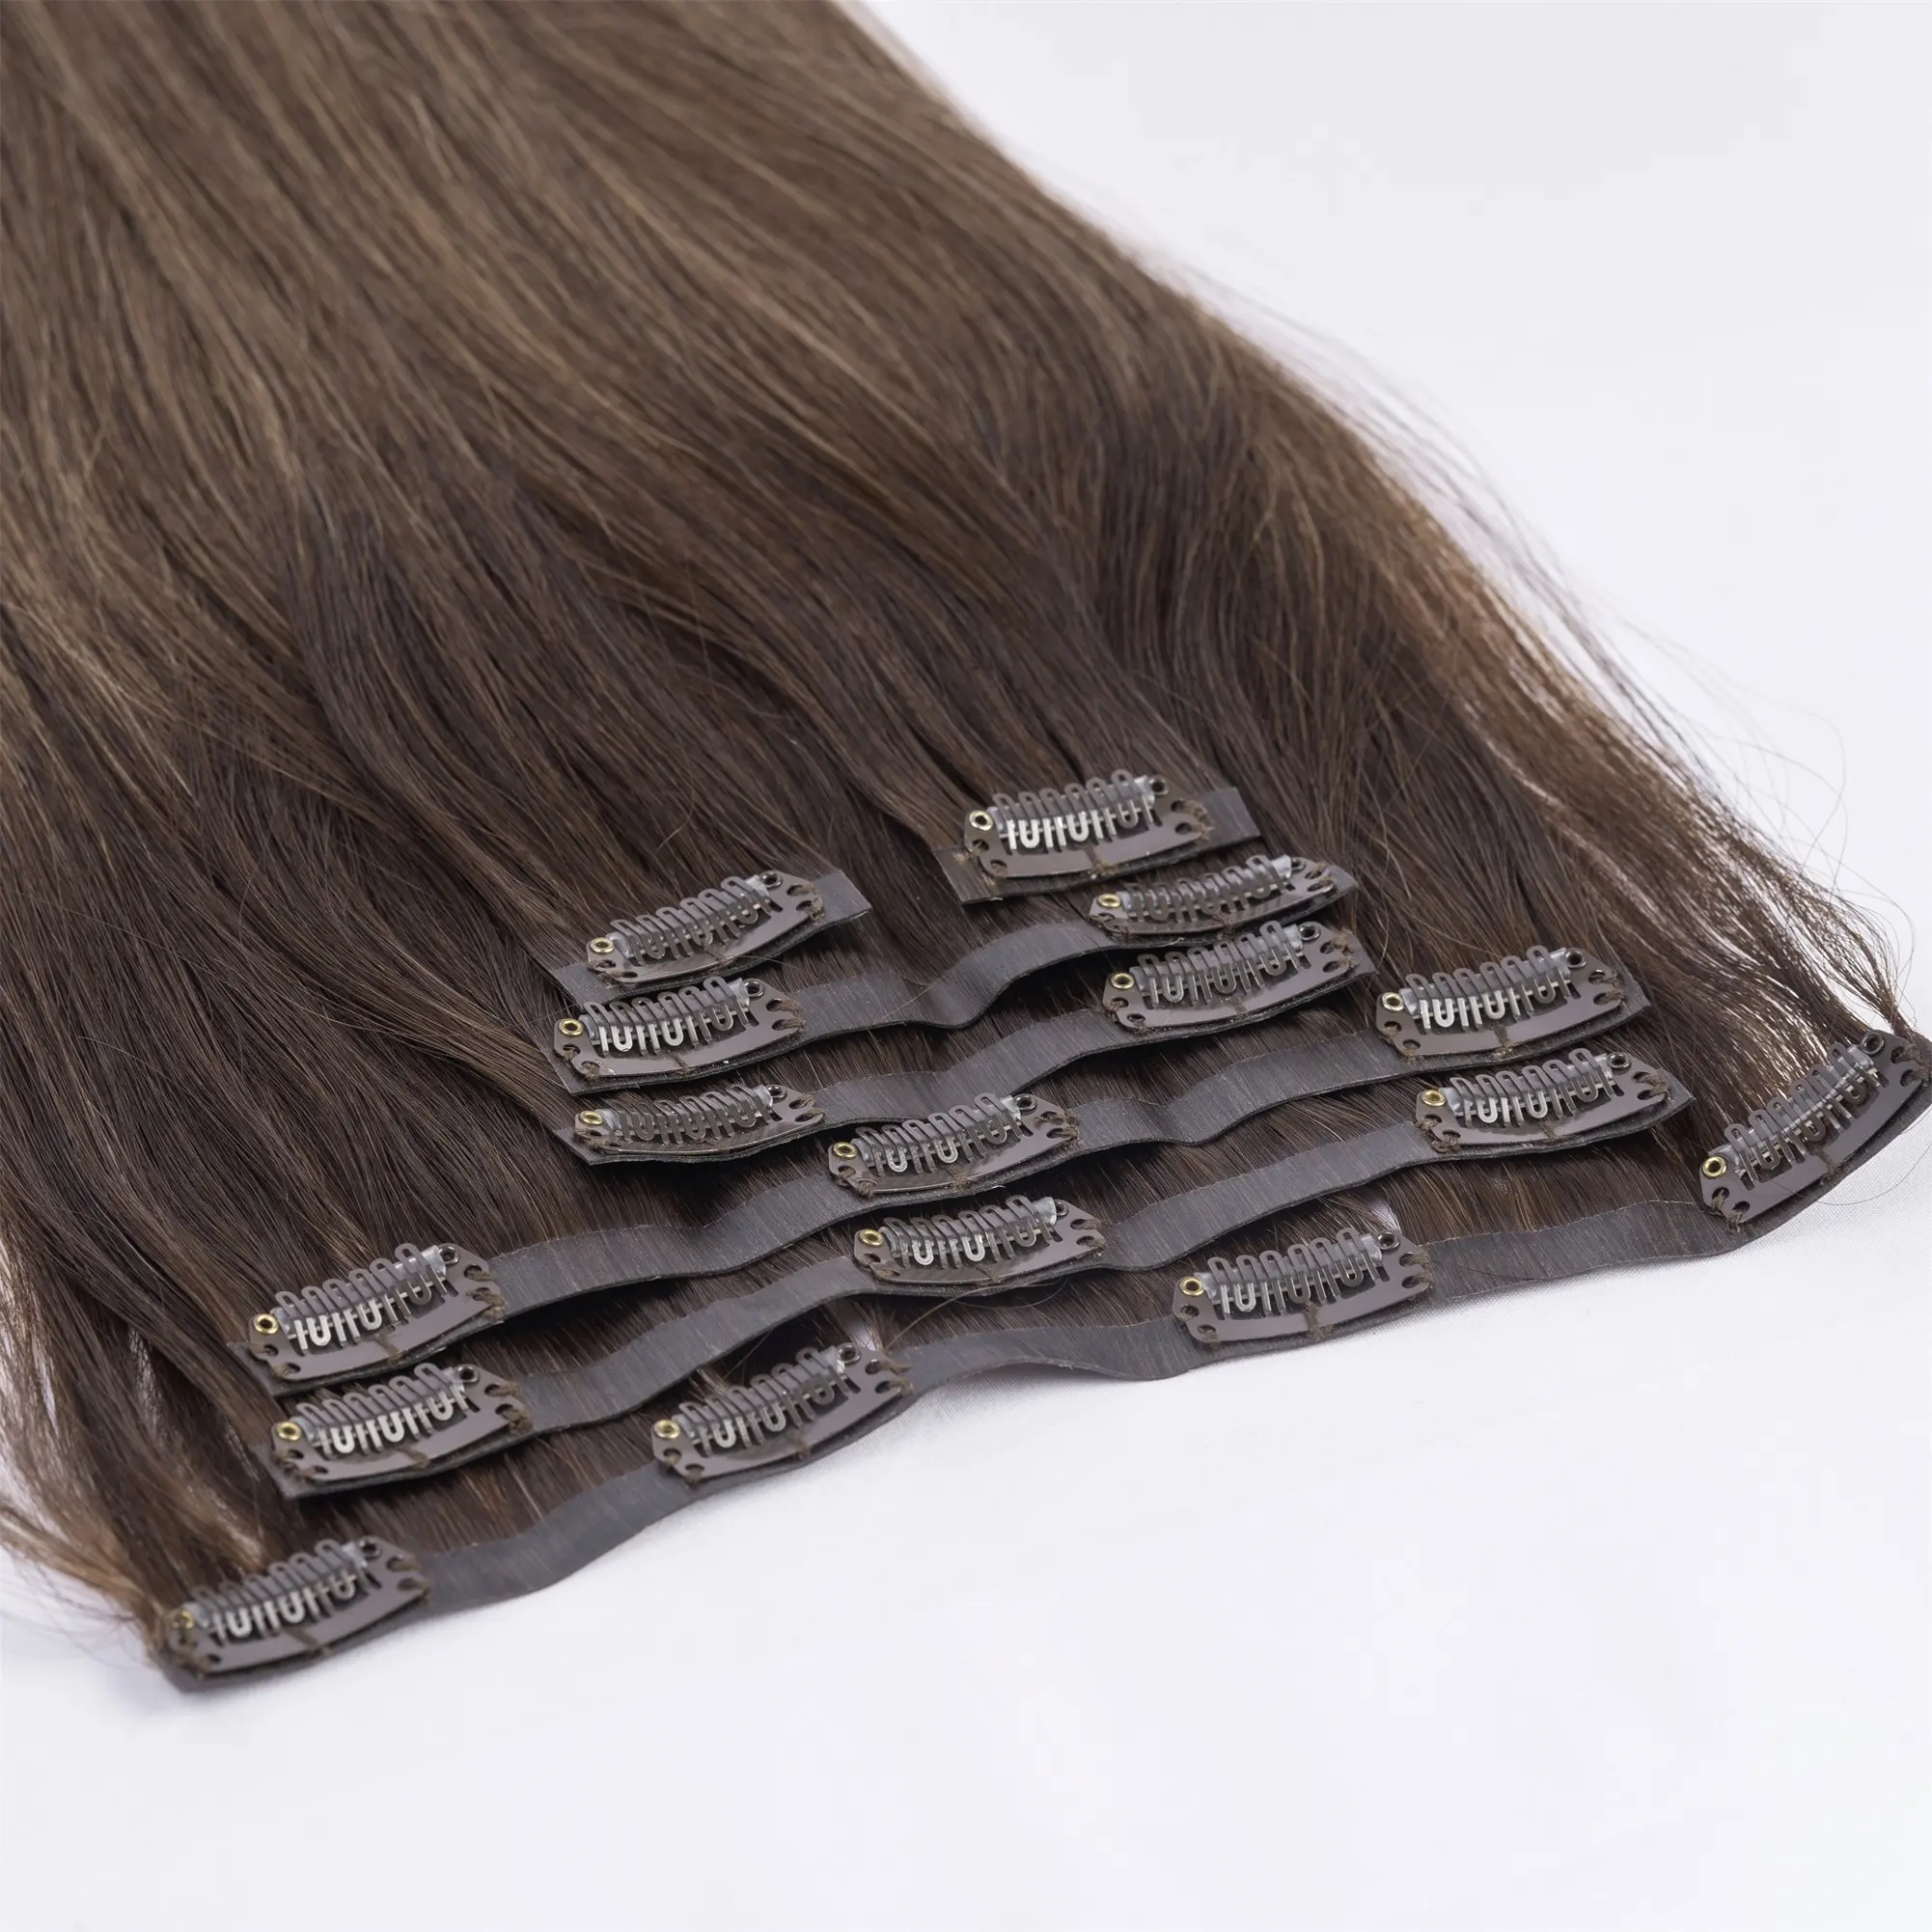 Hot Selling Unparalleled Invisible Hair Extensions High Quality Pu Skin Seamless Clip In Hair Extension